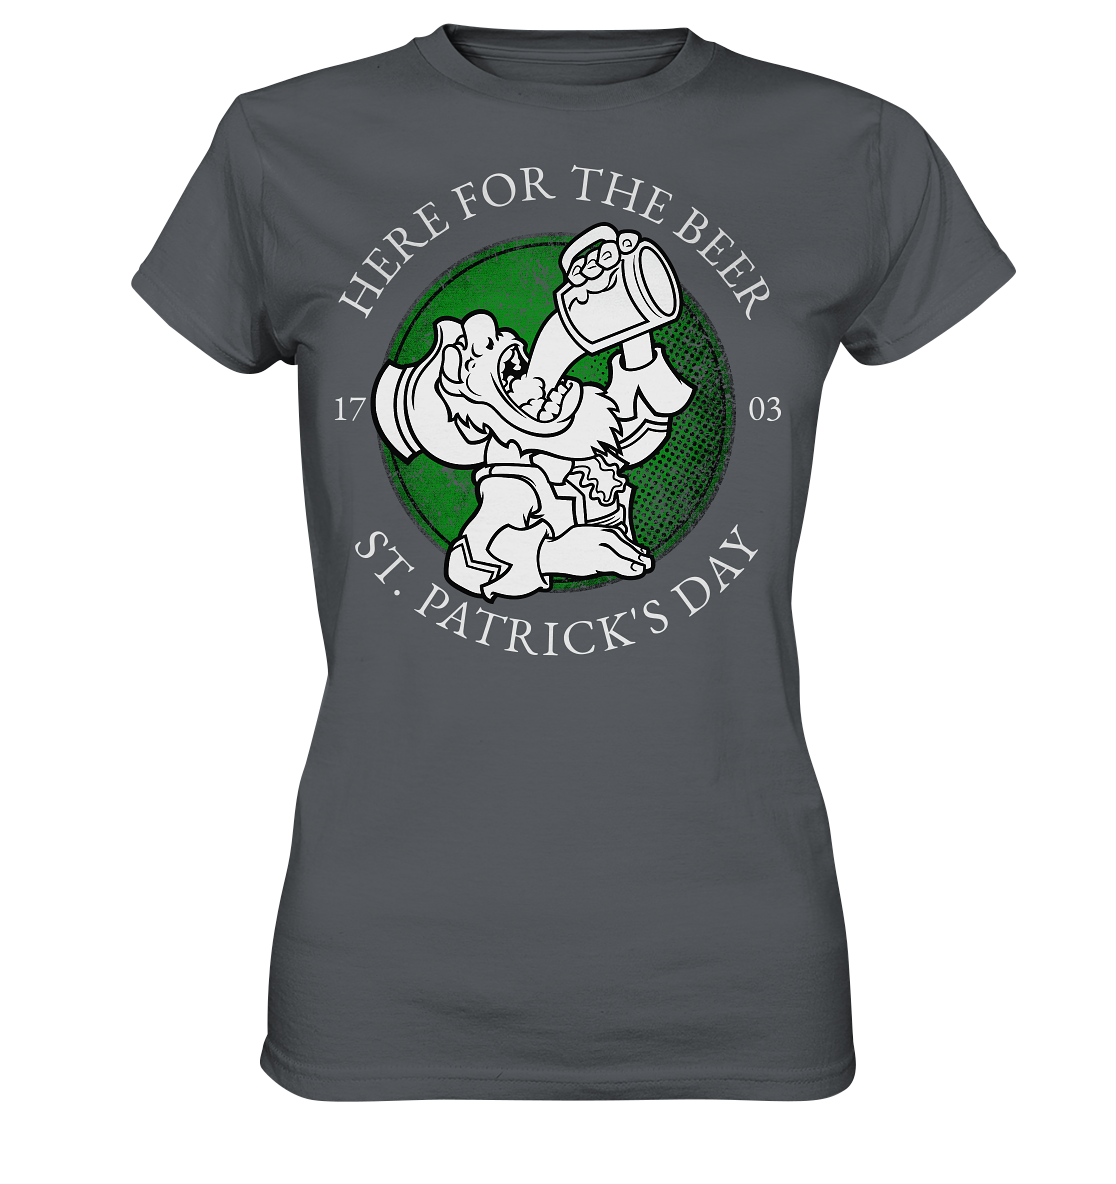 Here For The Beer "St. Patrick's Day" - Ladies Premium Shirt